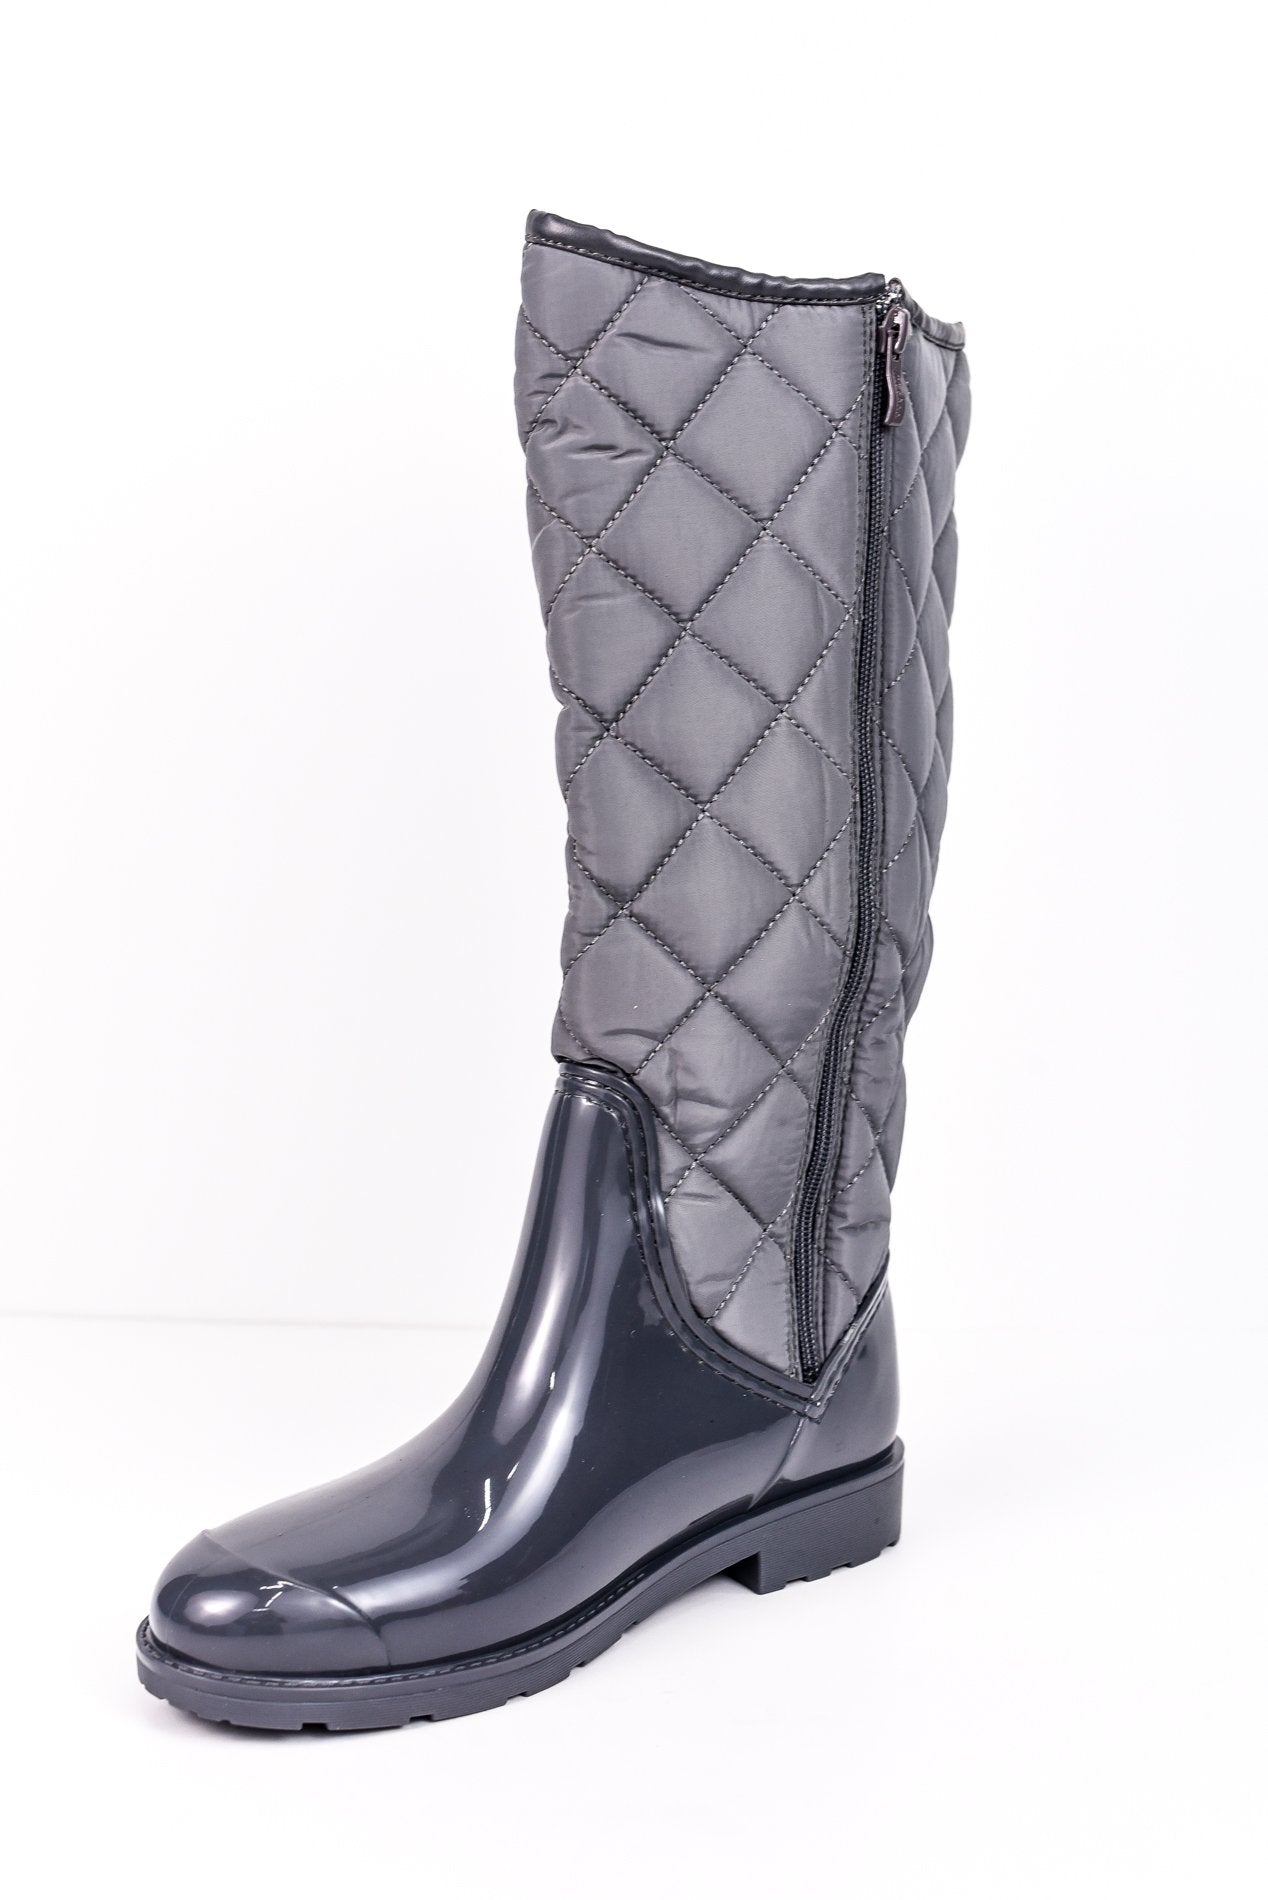 rain boots with lining inside